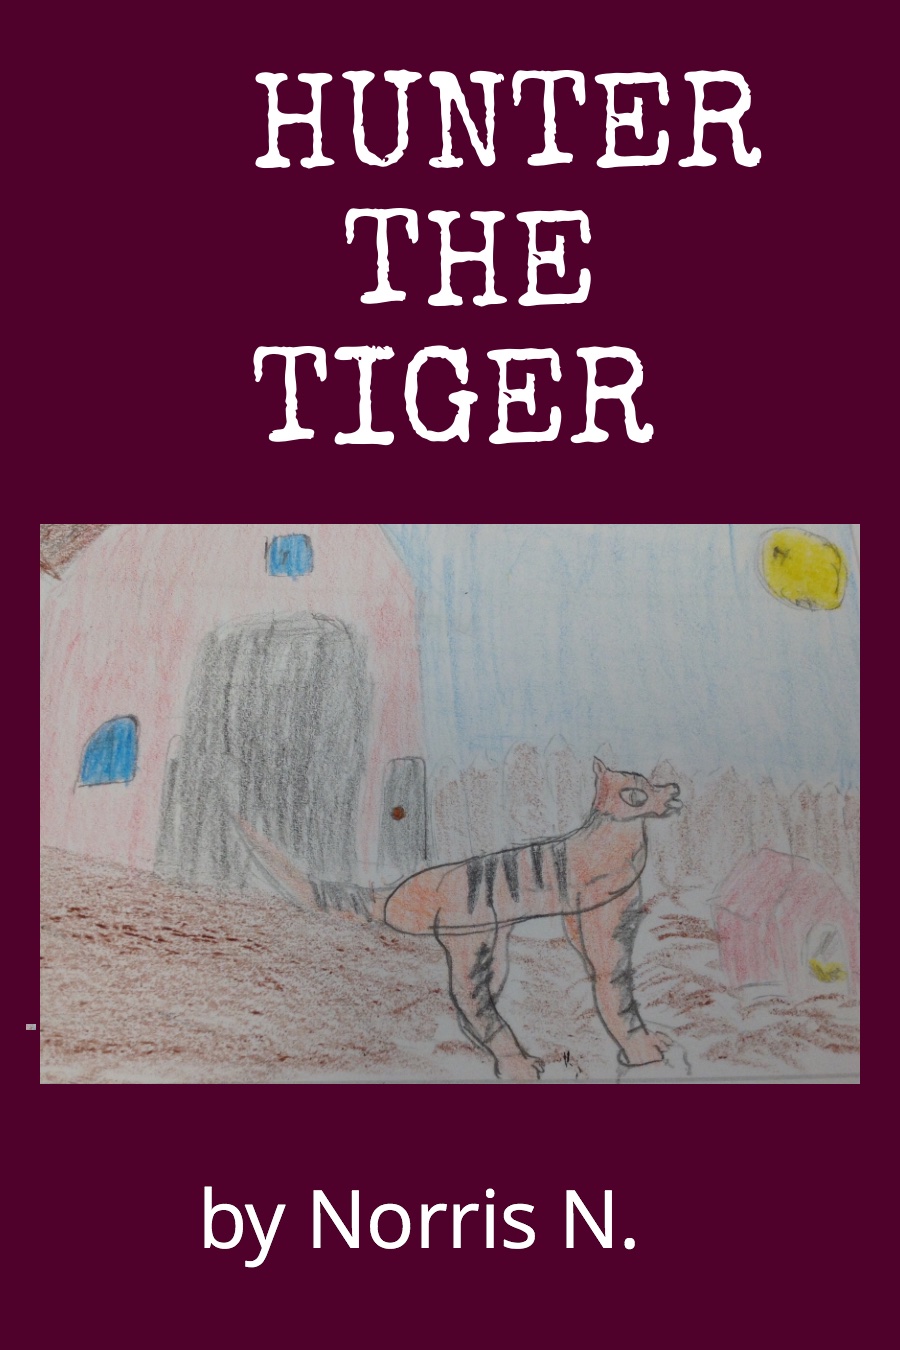 Hunter the Tiger by Norris N